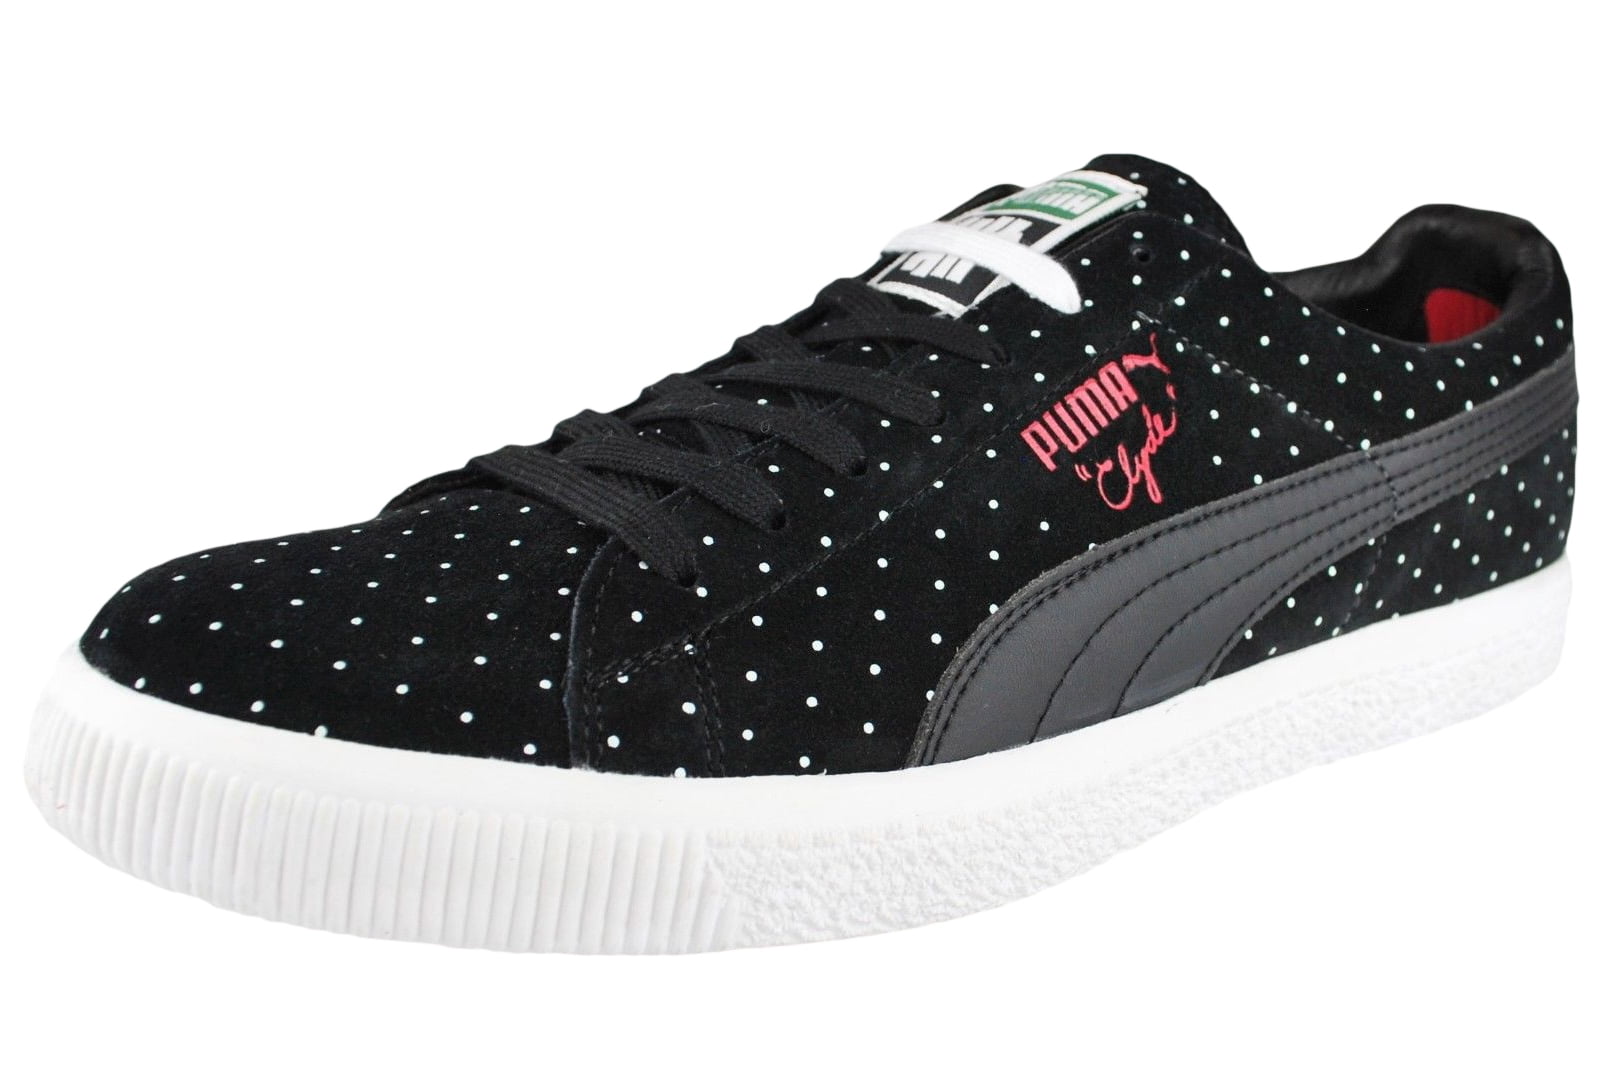 undefeated puma clyde